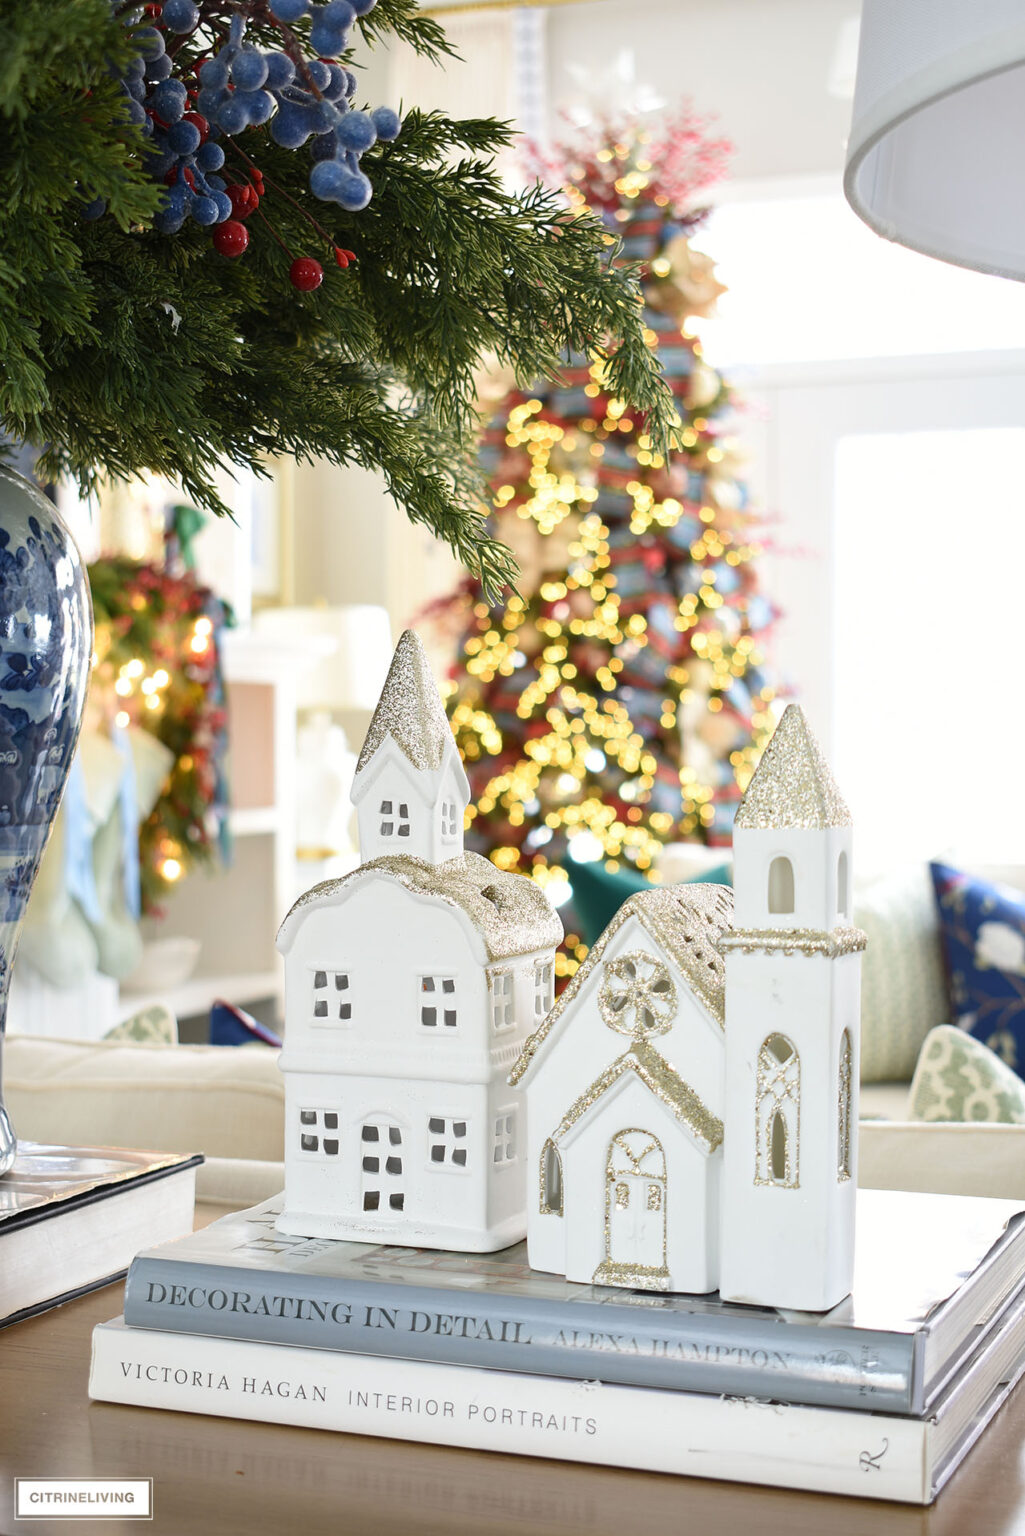 Traditional Christmas decor in our living room | CITRINELIVING